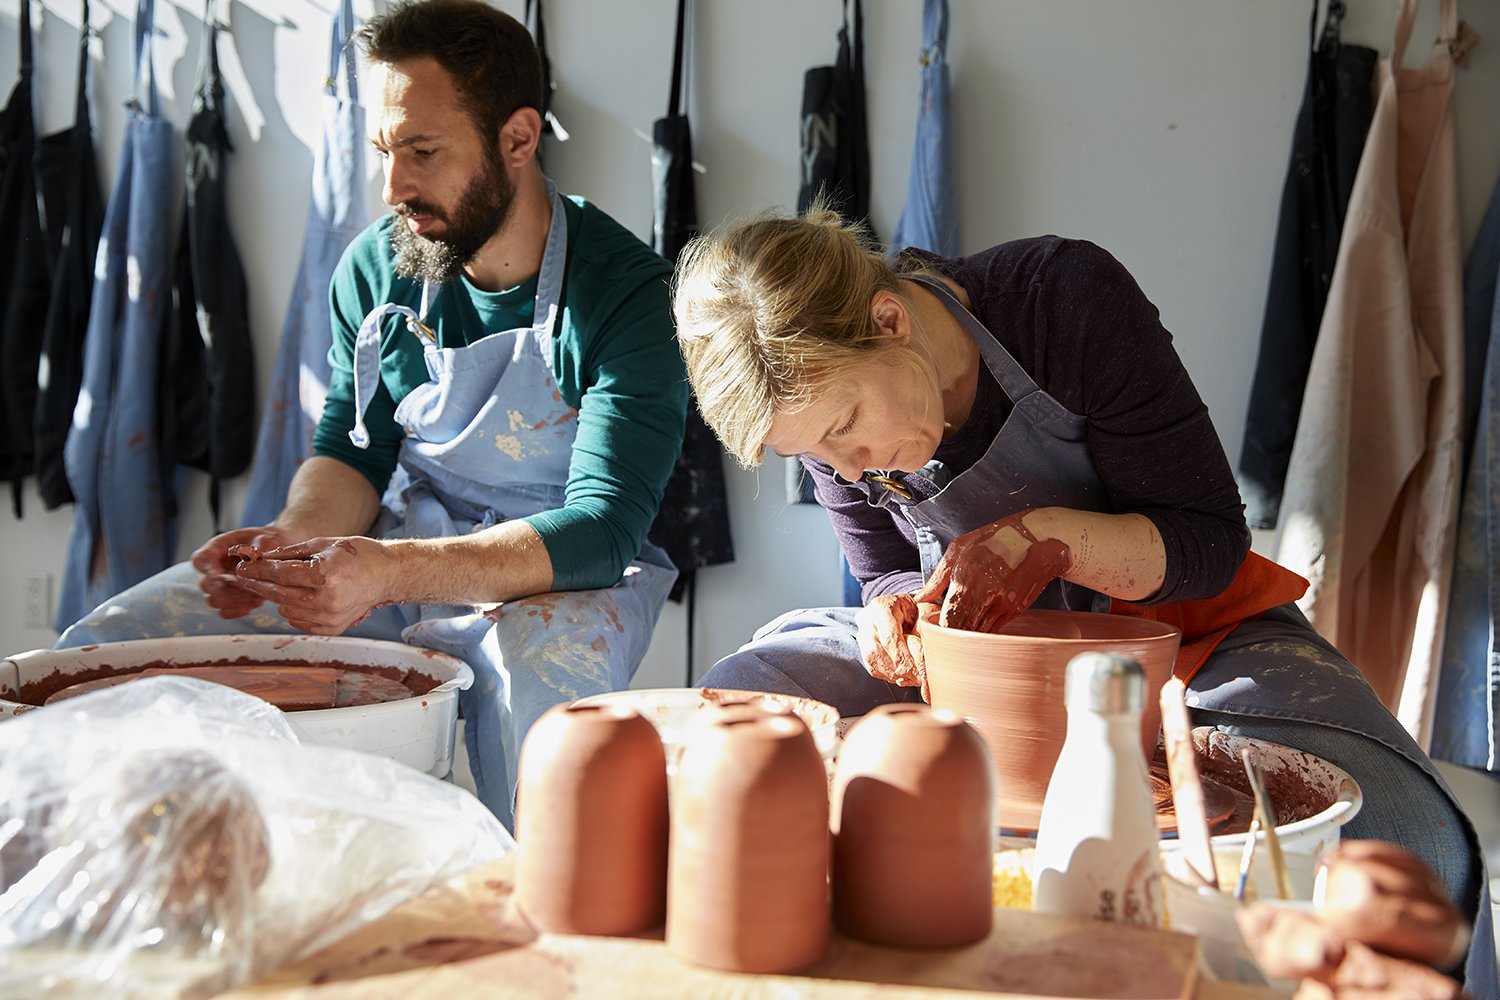 Ceramics and Clay Sculpting: The Art of Ceramics [Class in NYC] @ Craftsman  Ave